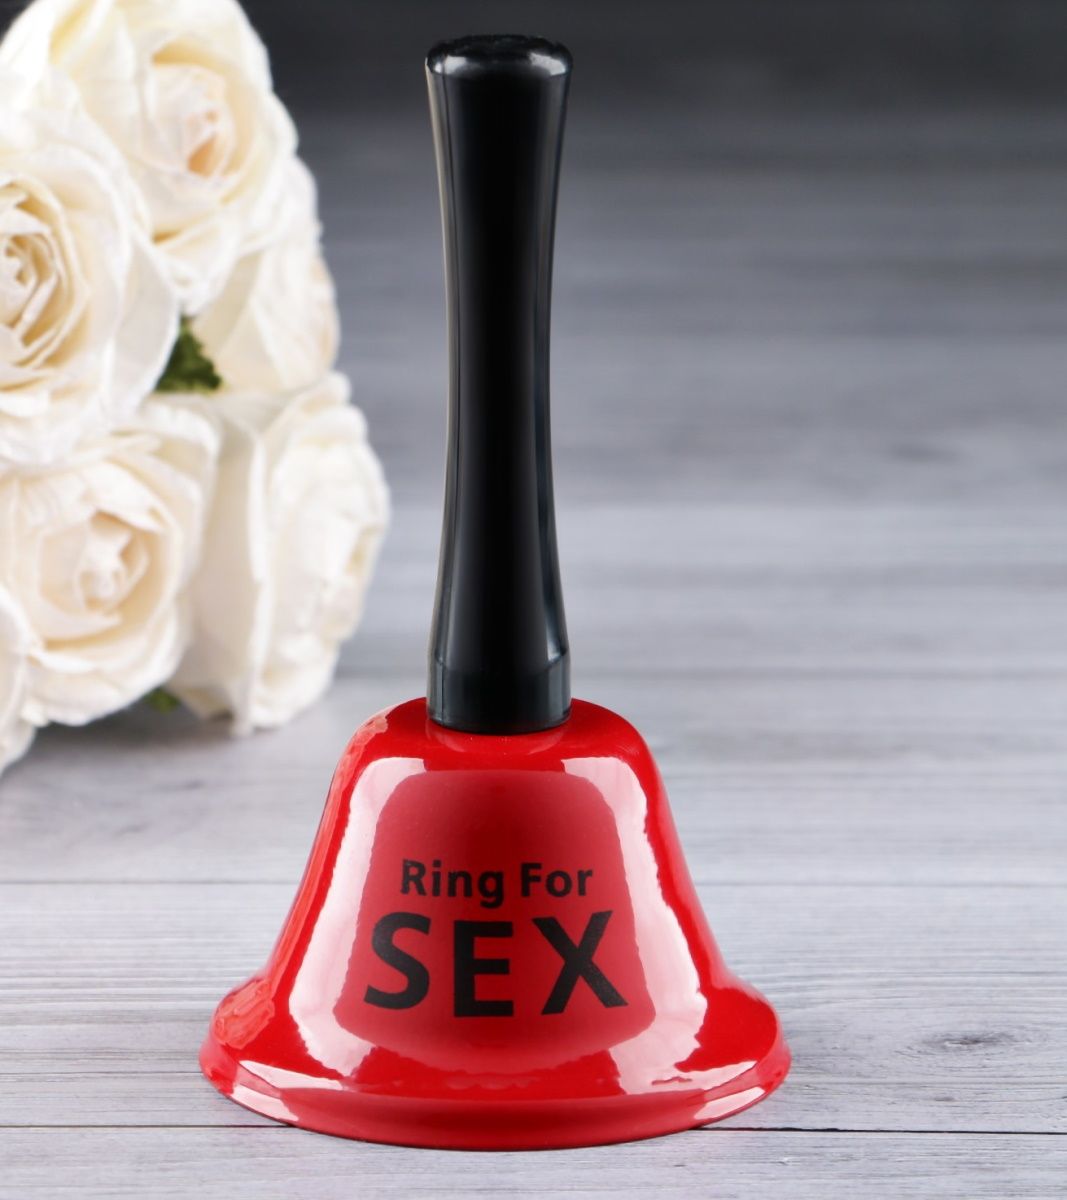   RING FOR SEX